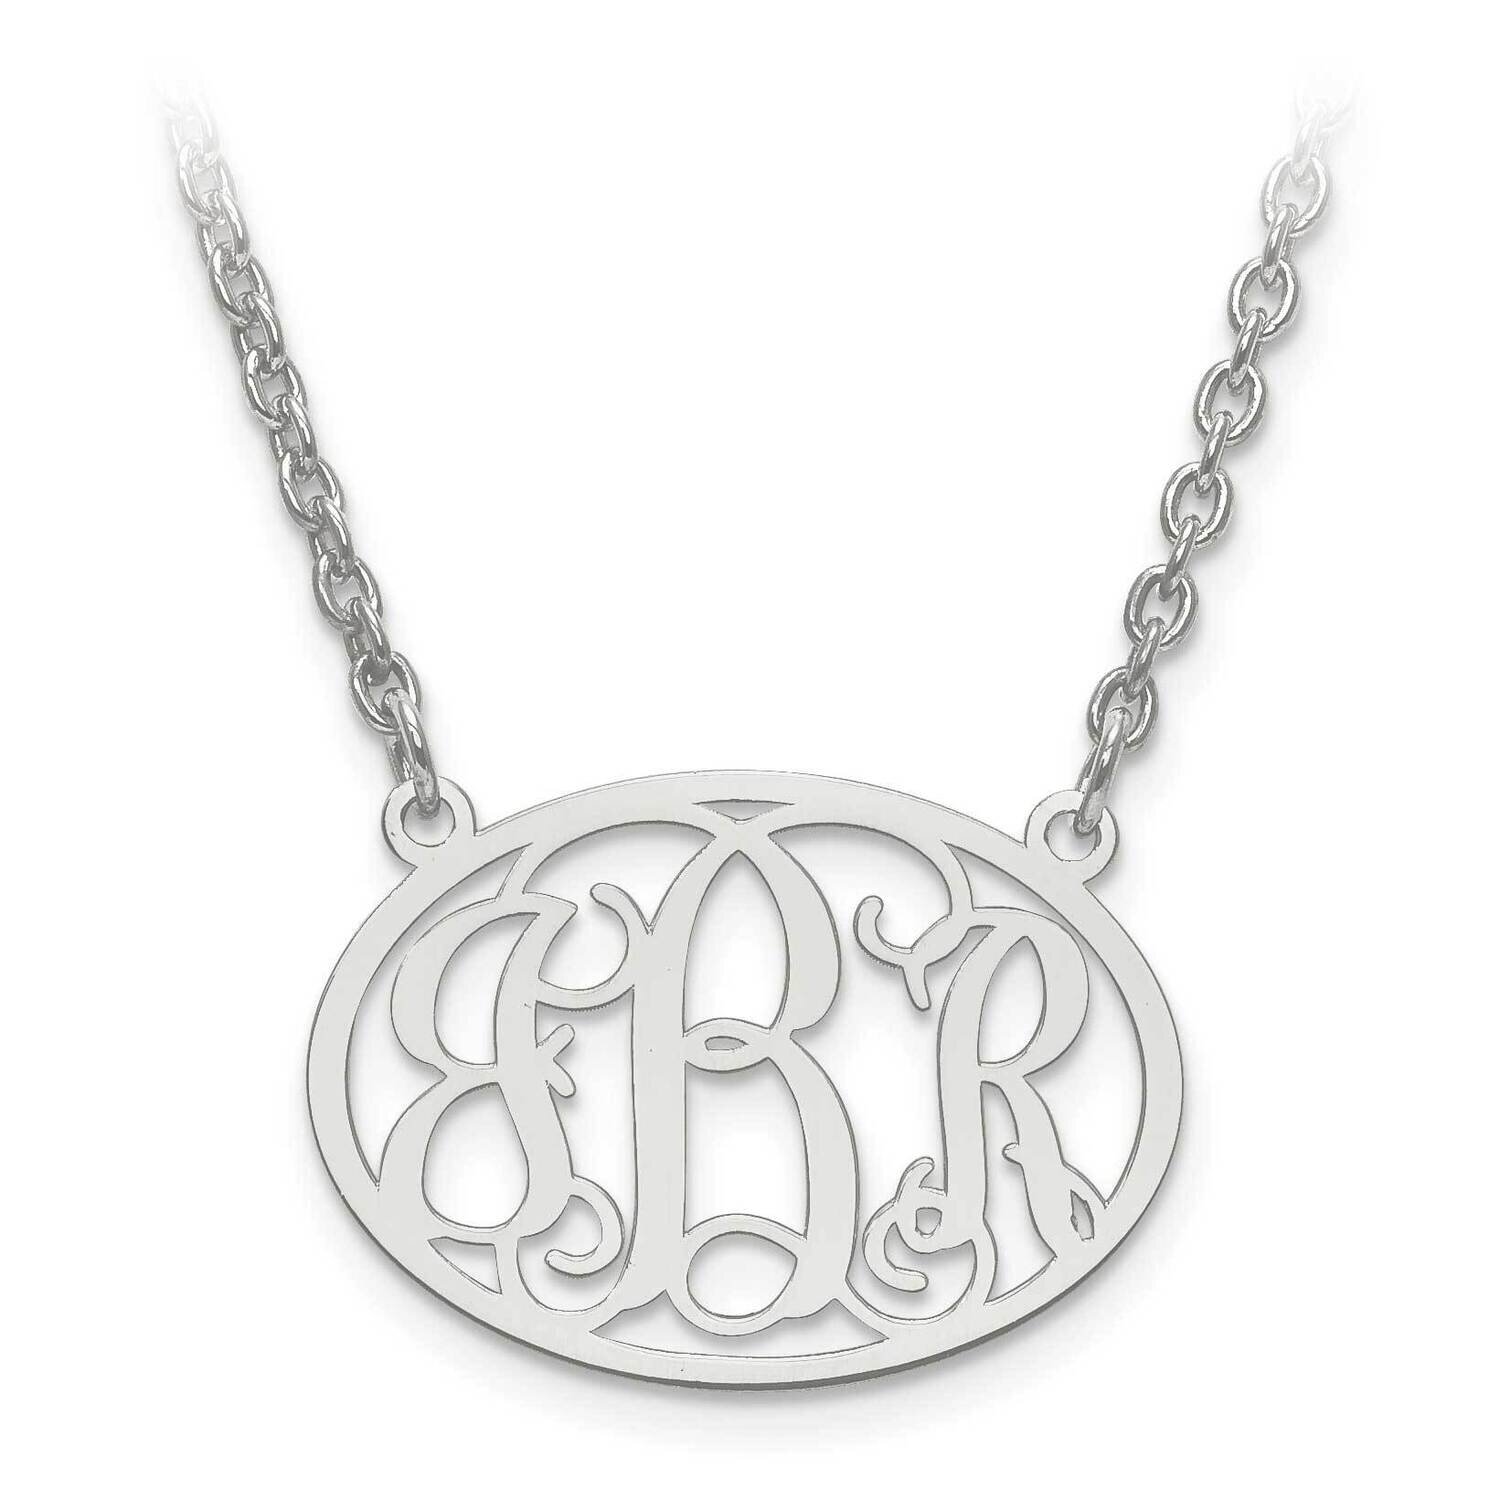 Small Laser Polished Oval Monogram Plate with Chain 10k White Gold 10XNA577W